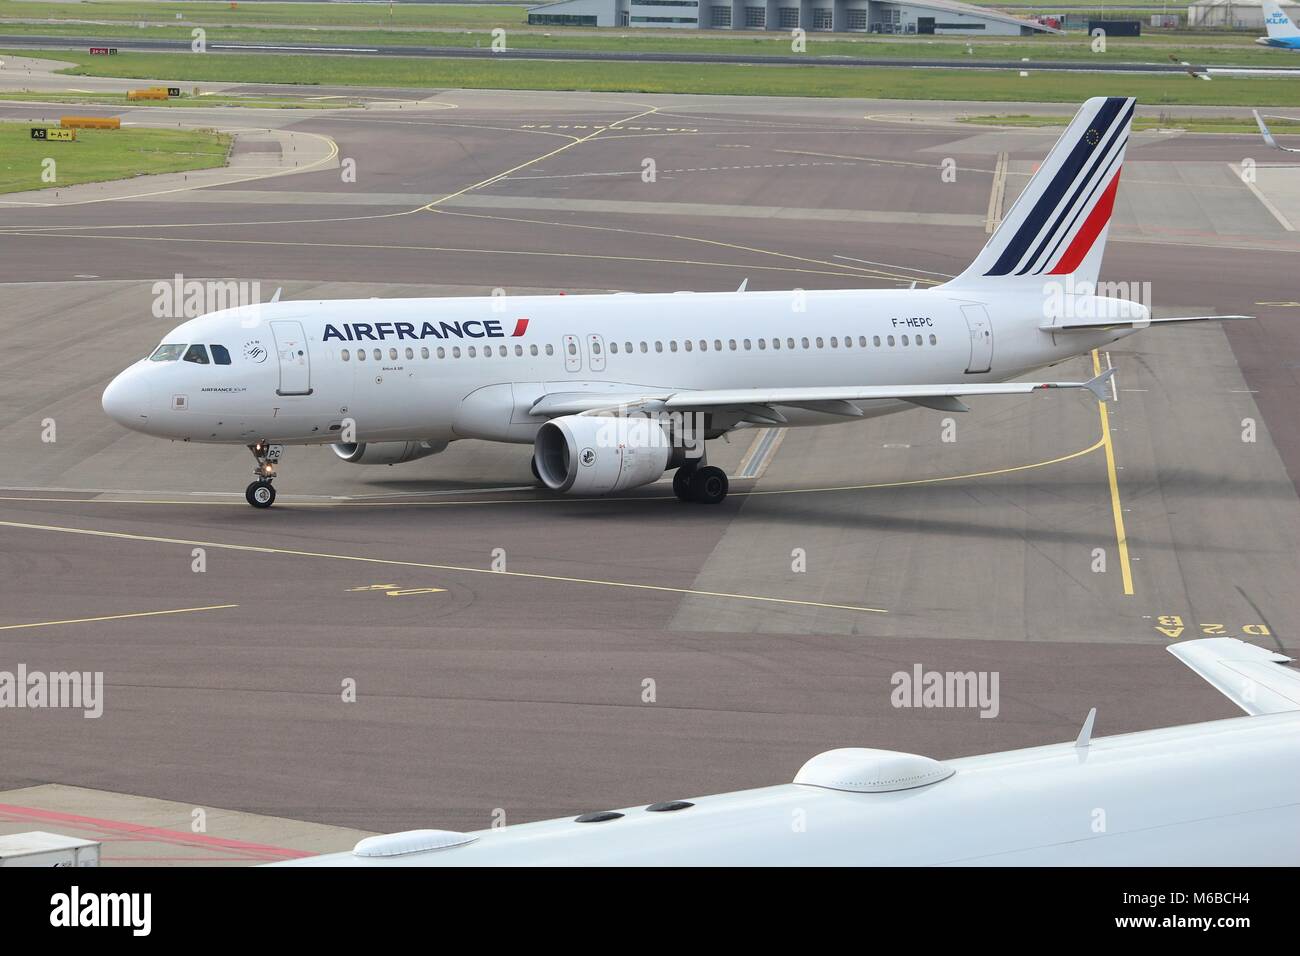 AMSTERDAM, NETHERLANDS - JULY 11, 2017: Air France Airbus A320 at Schiphol Airport in Amsterdam. Schiphol is the 12th busiest airport in the world wit Stock Photo